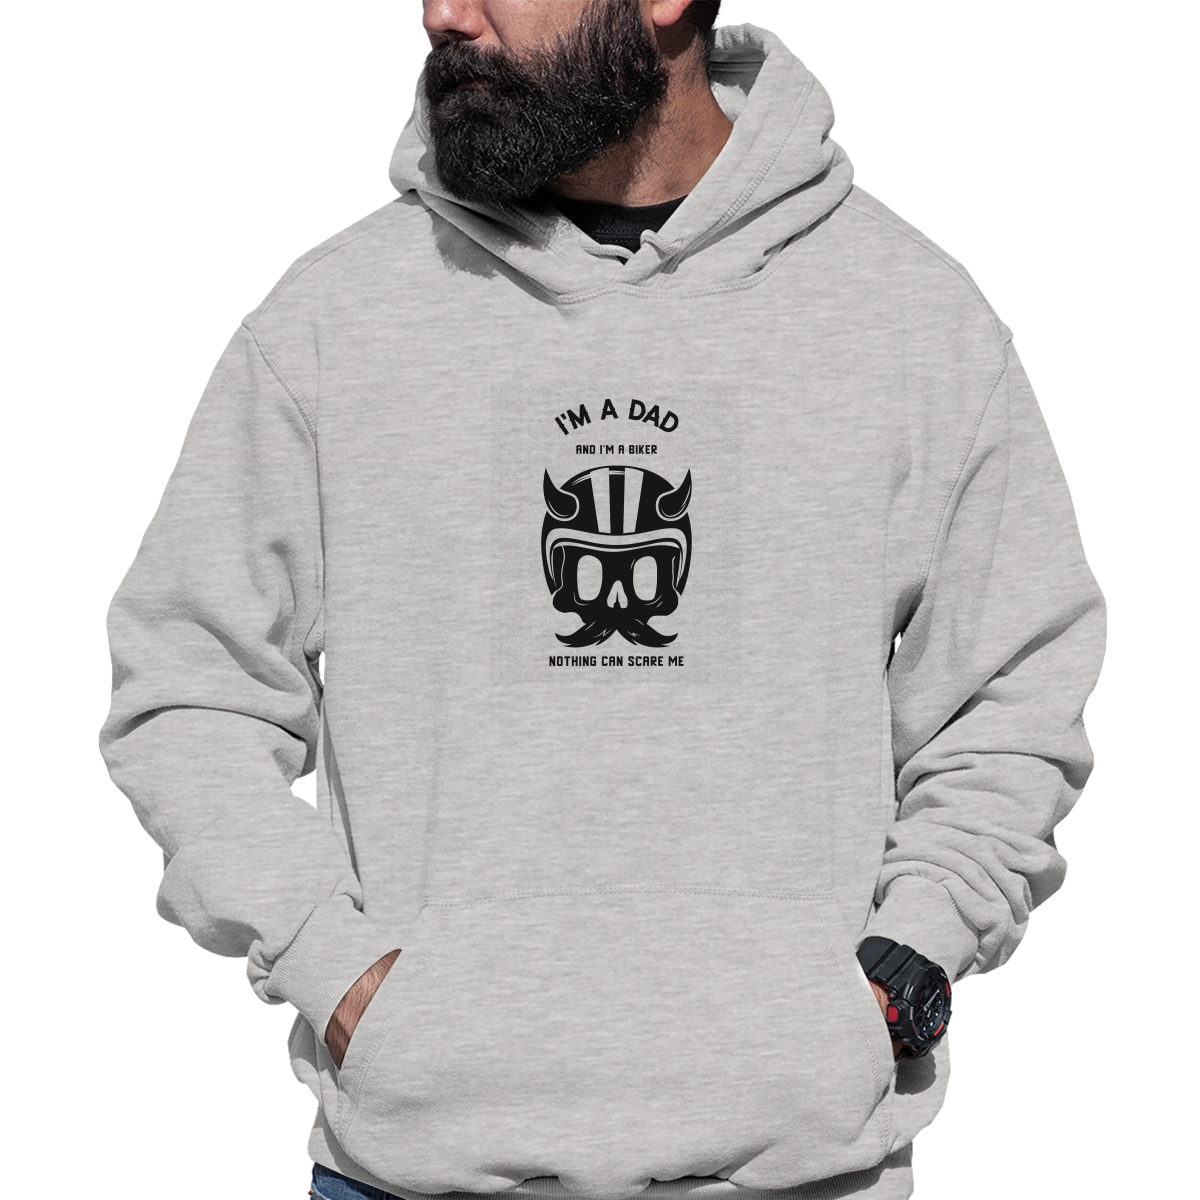 I'm a dad and a biker Unisex Hoodie | Gray